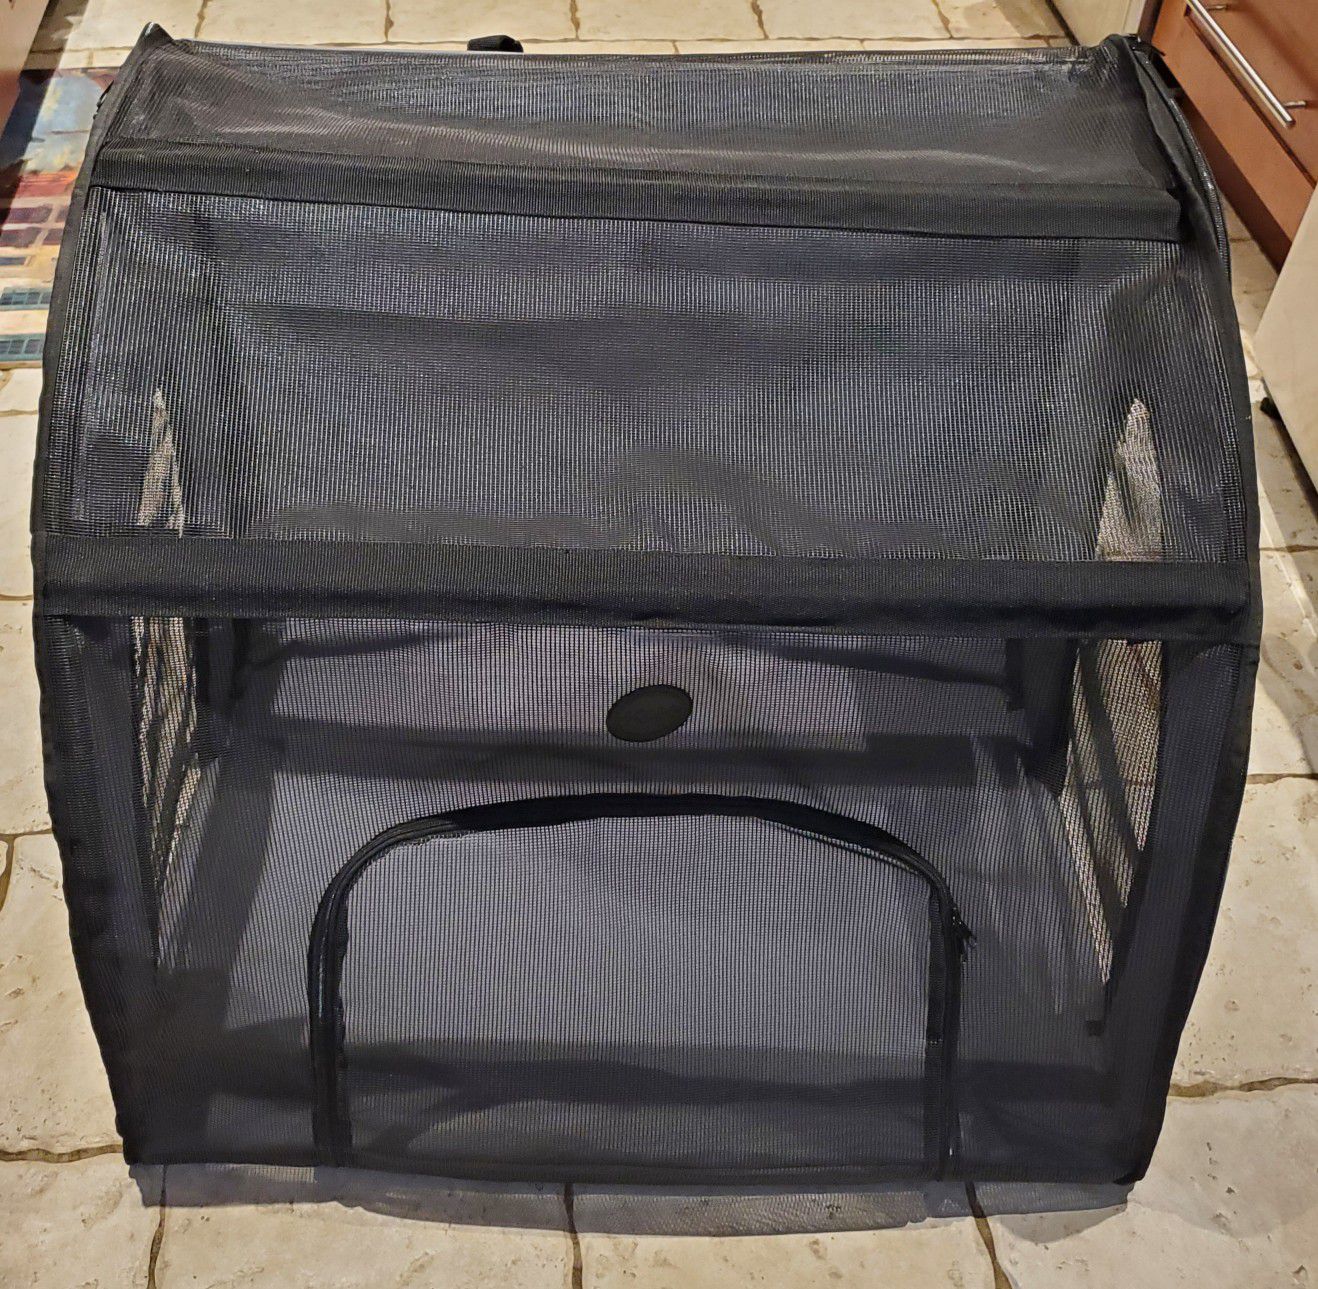 New foldable Dog Crate